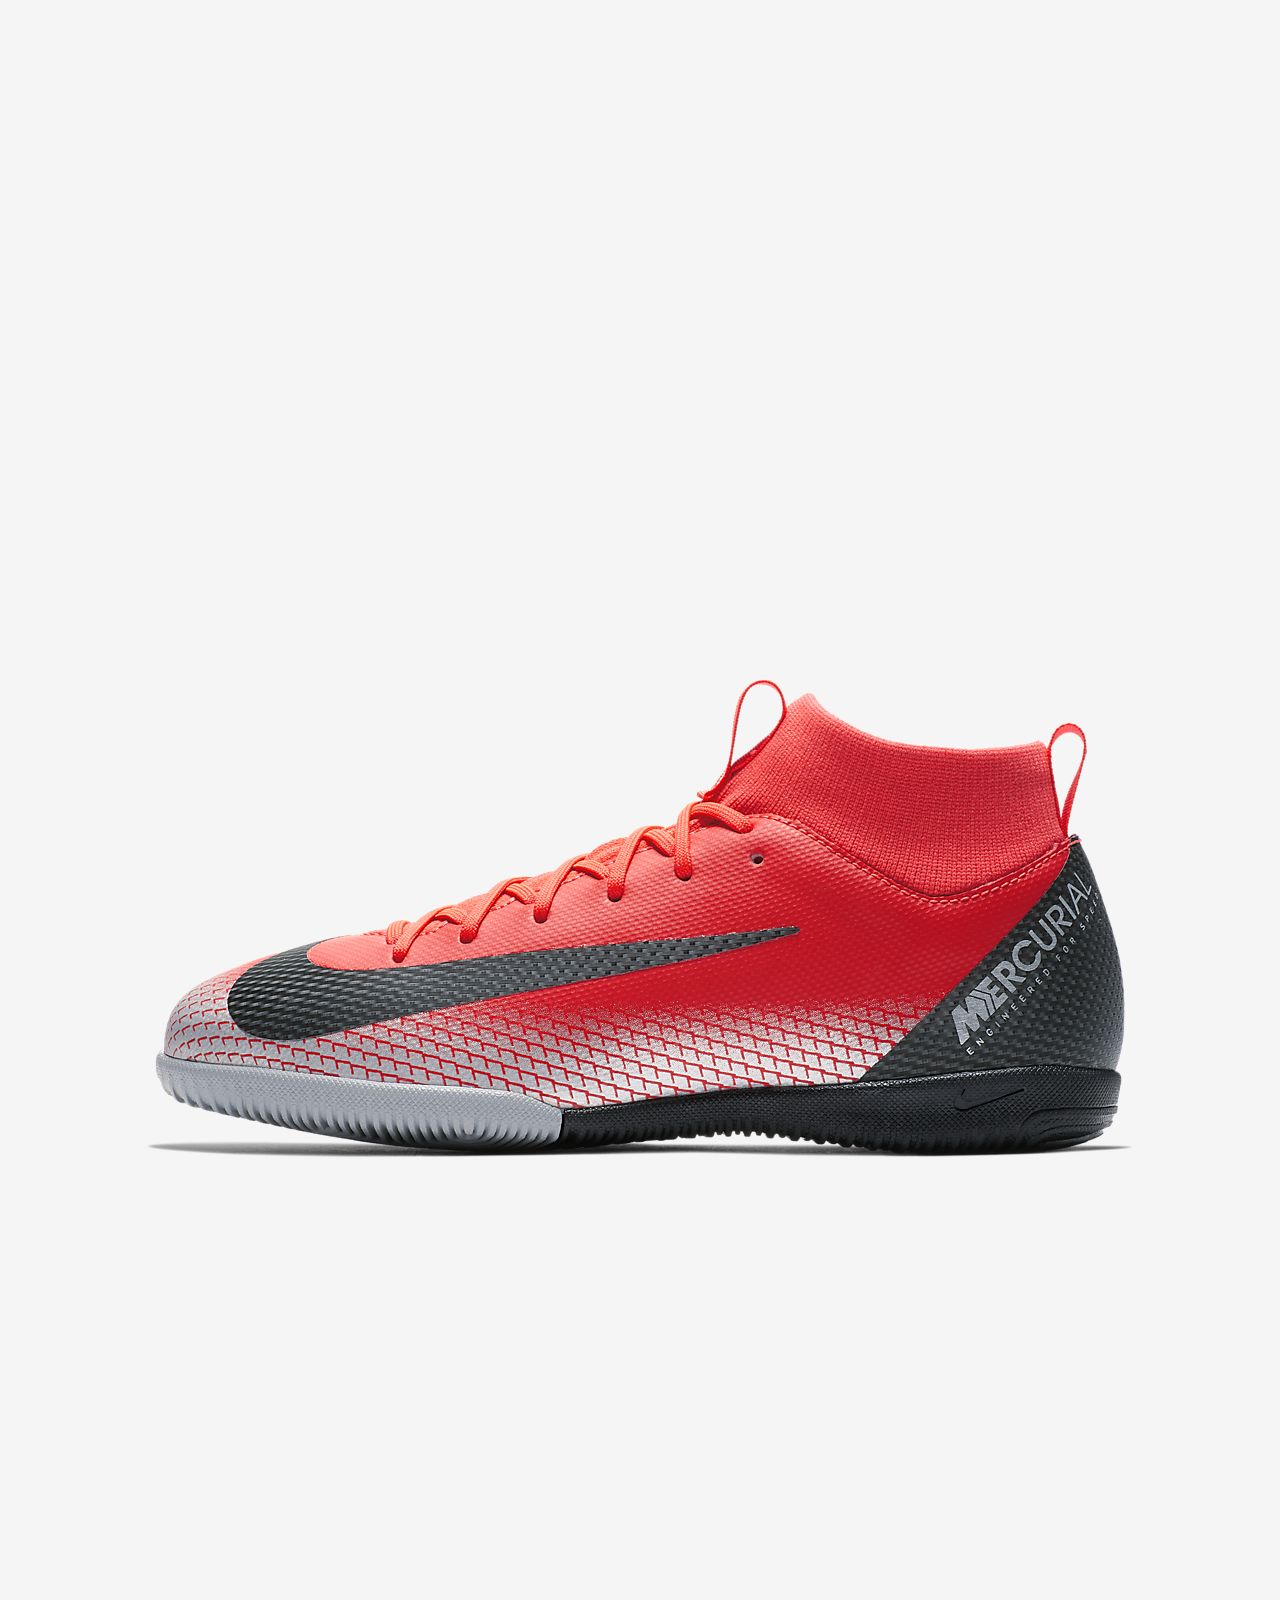 Nike Jr. SuperflyX 6 Academy LVL UP IC Younger/Older Kids' Indoor/Court  Football Shoe. Nike IE